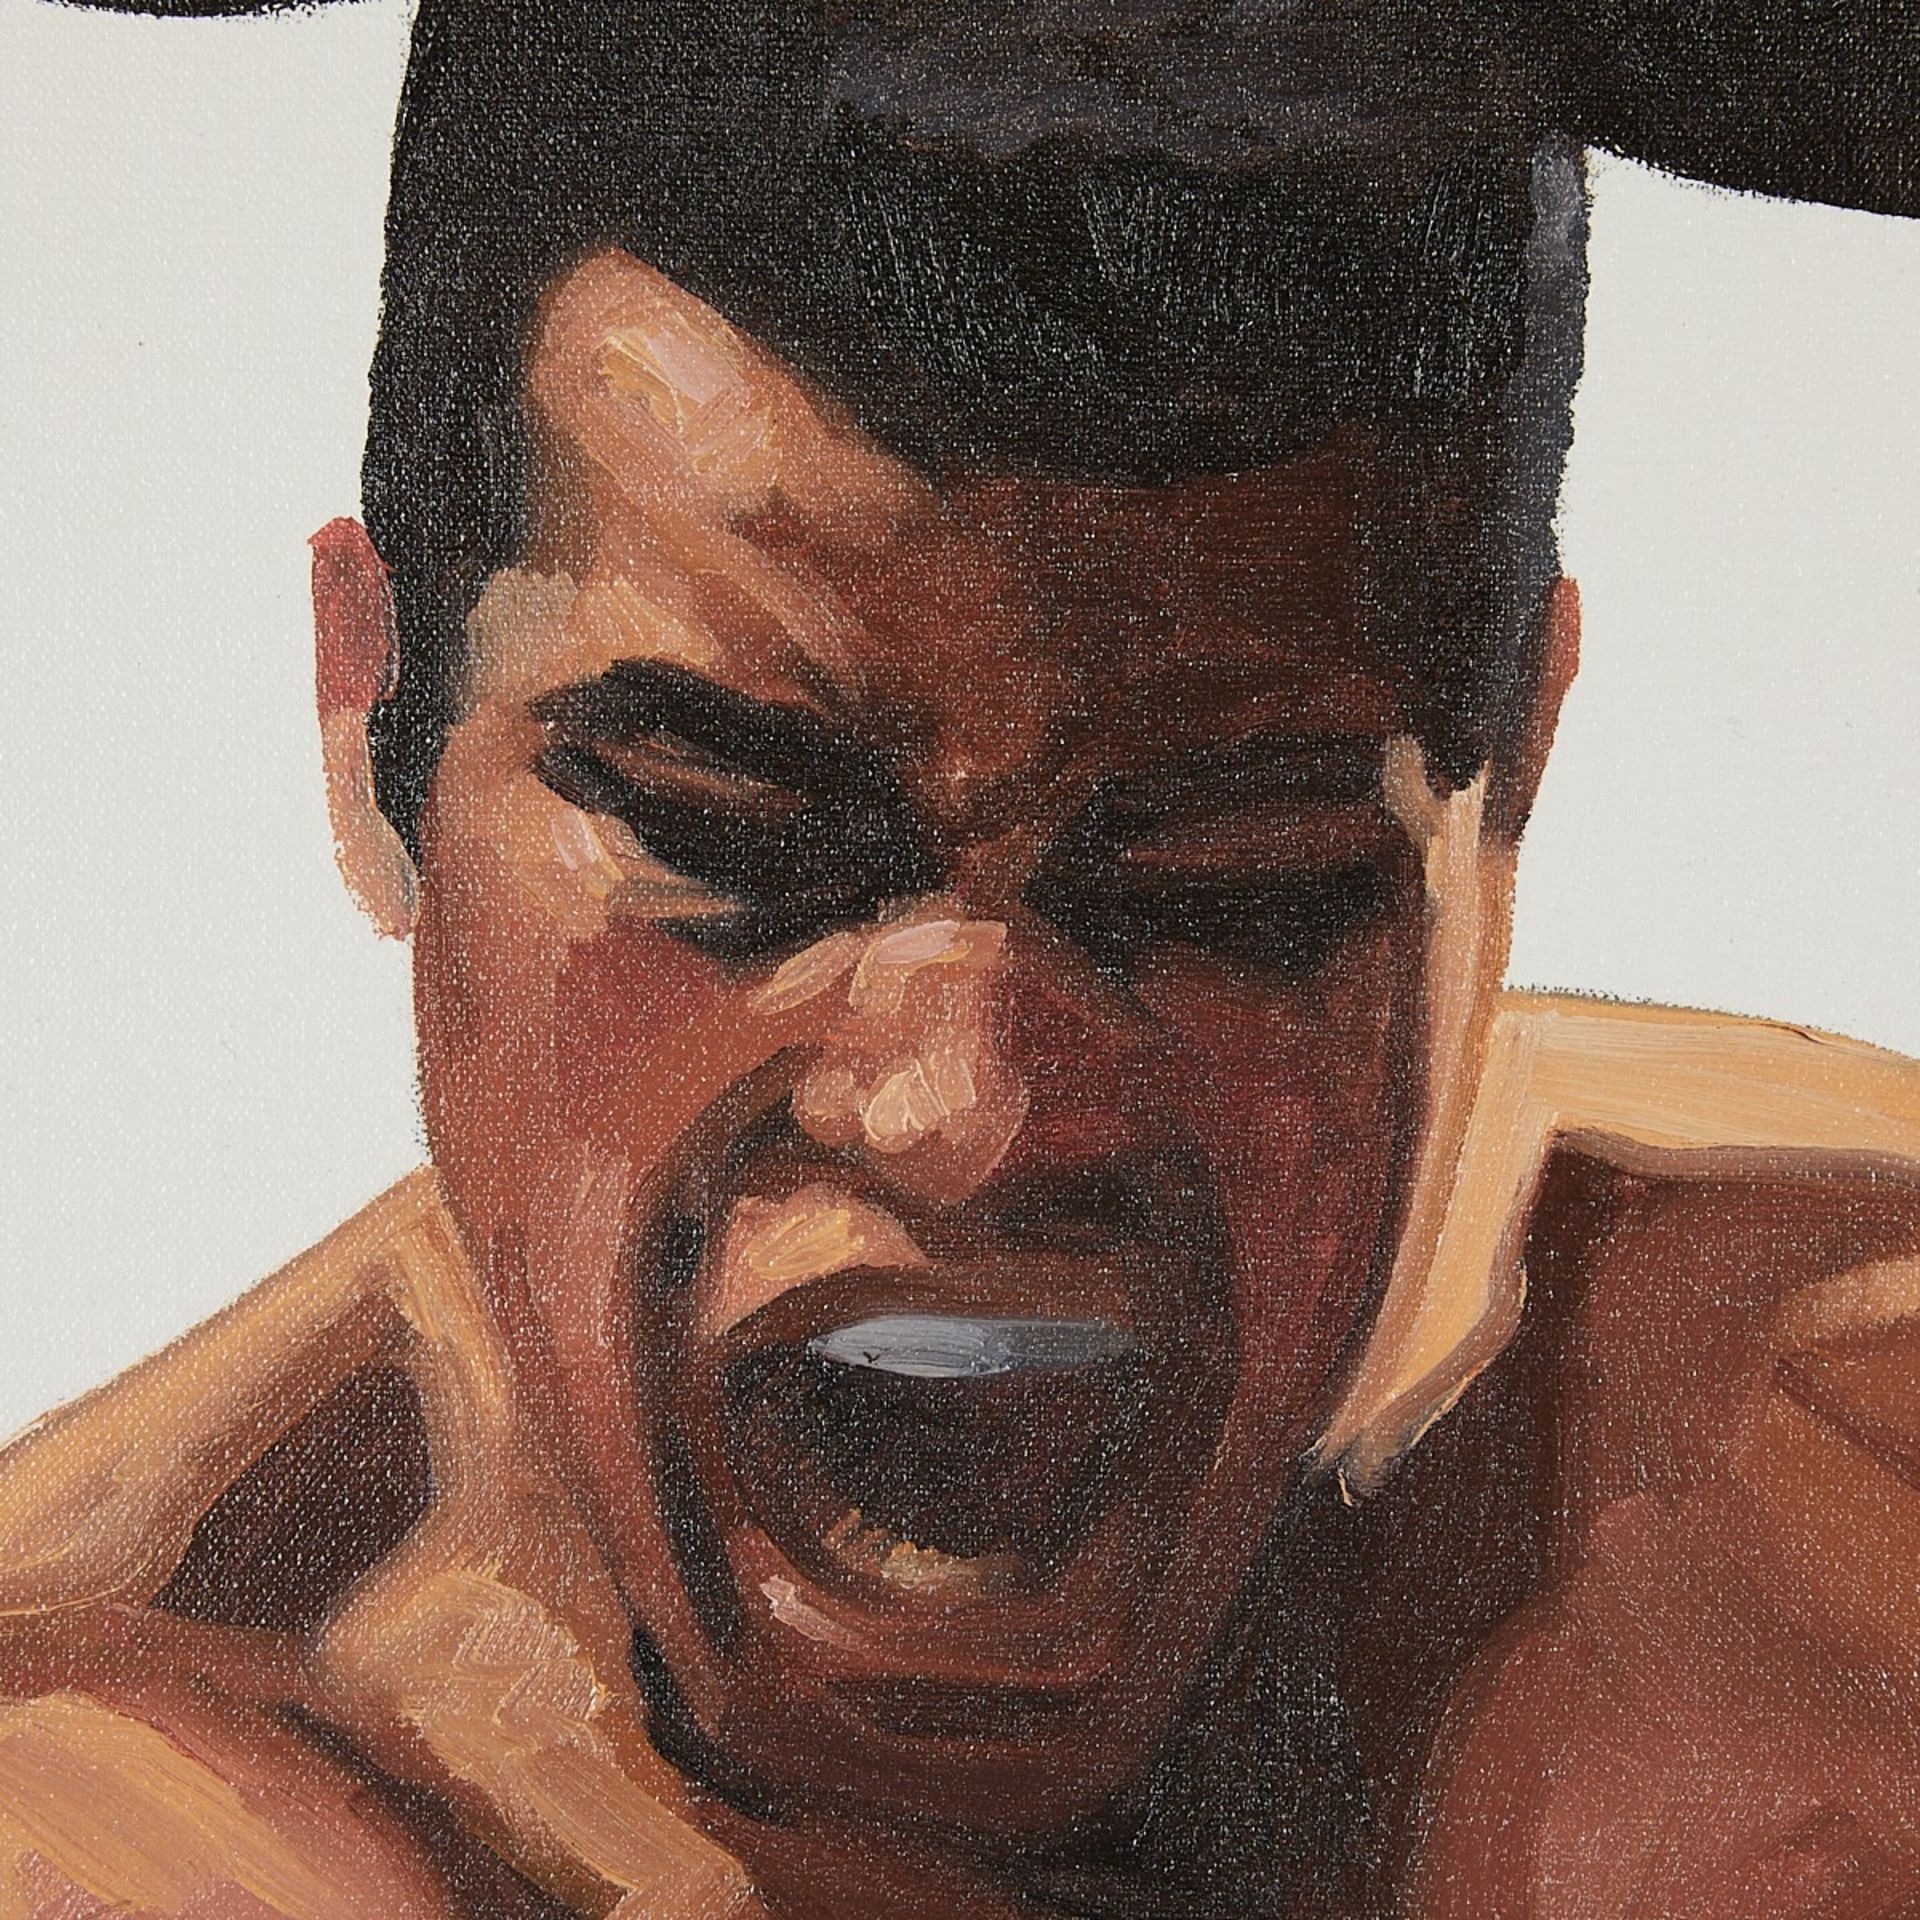 Shane Bowden "Ali Mouse" Painting - Image 4 of 7